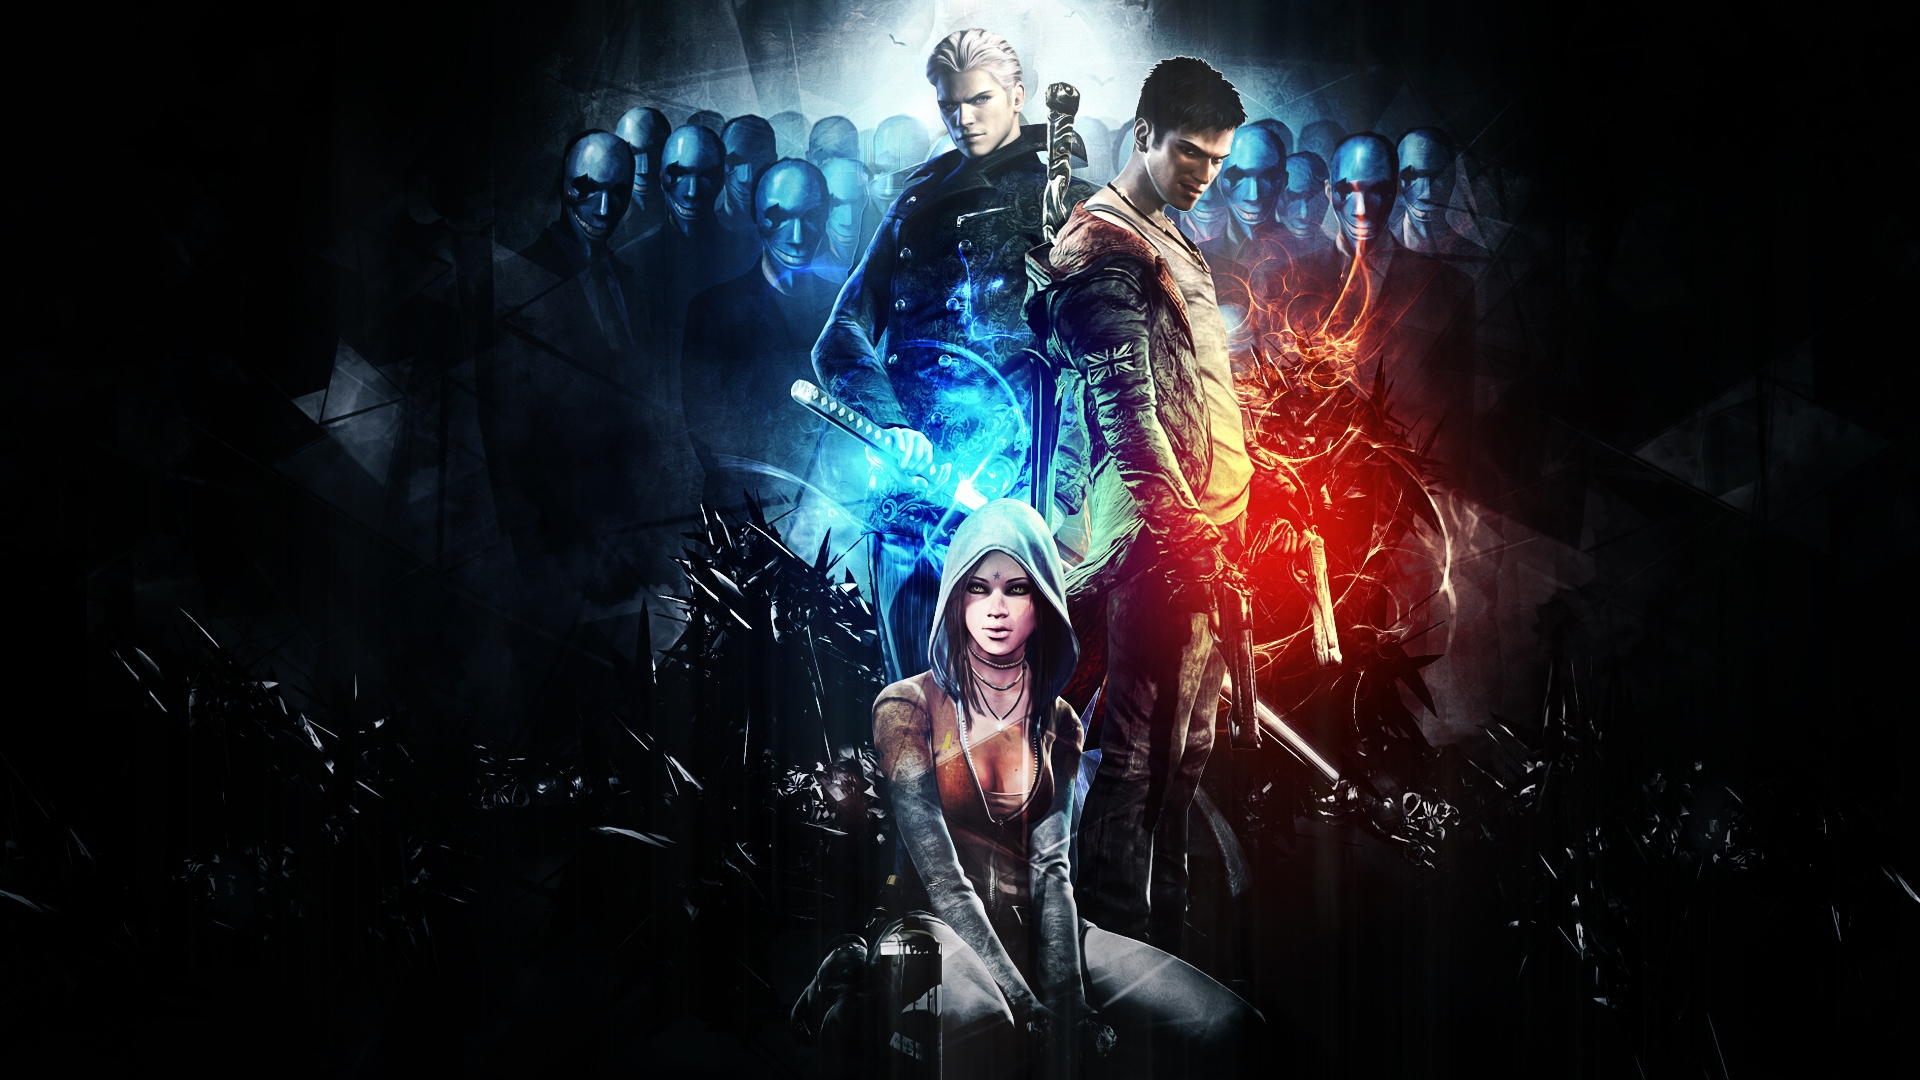 kat (devil may cry), dmc: devil may cry, video game, dante (devil may cry), devil may cry, vergil (devil may cry)